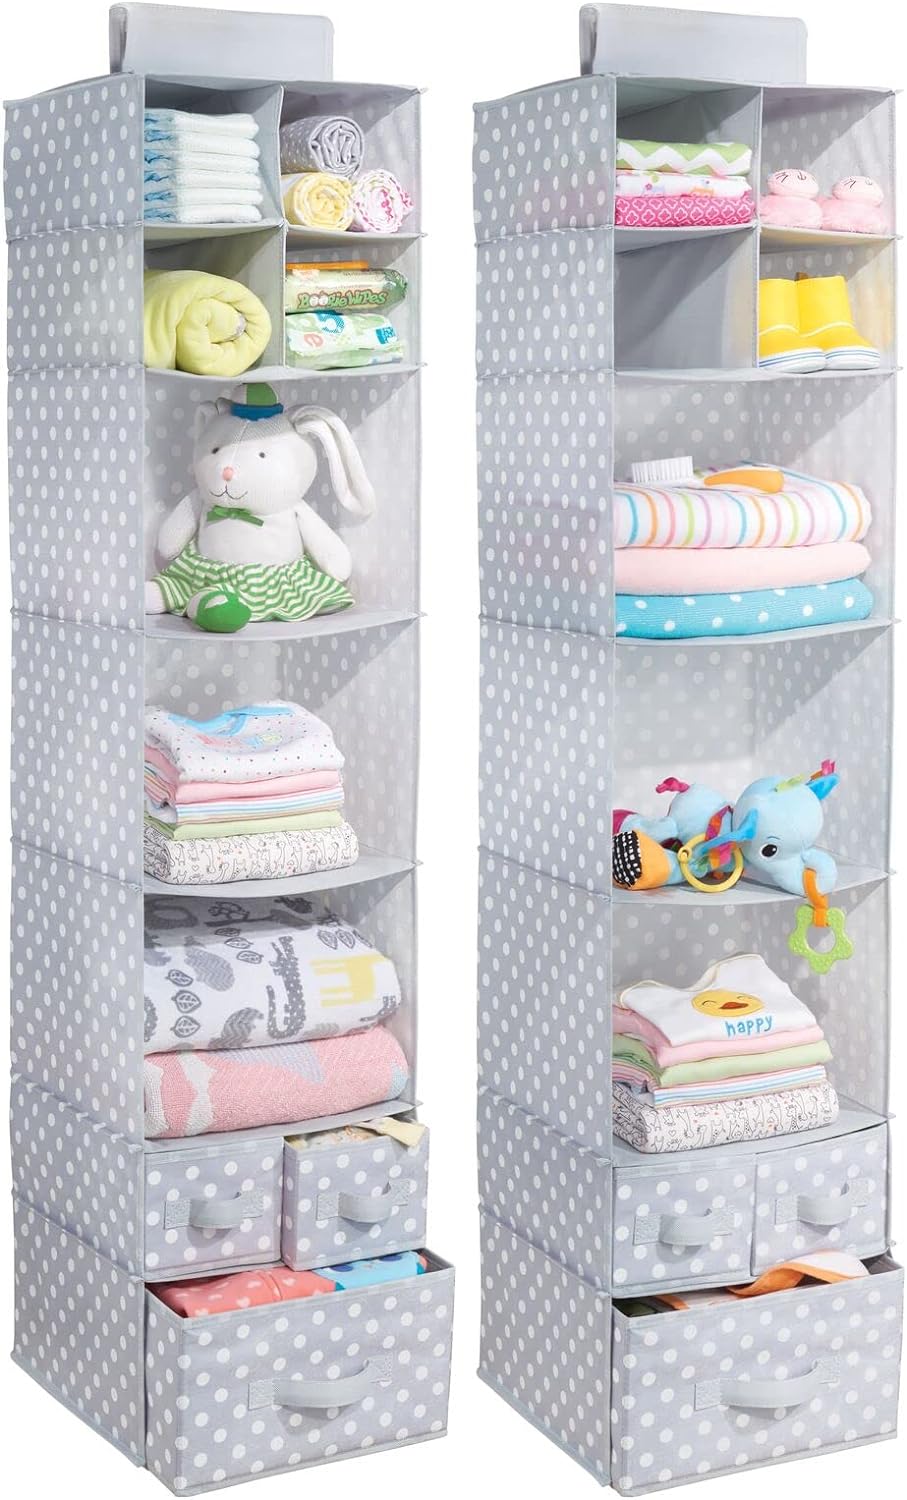 Blushbees Soft Fabric over Closet Rod Hanging Storage Organizer with 7 Shelves and 3 Removable Drawers.